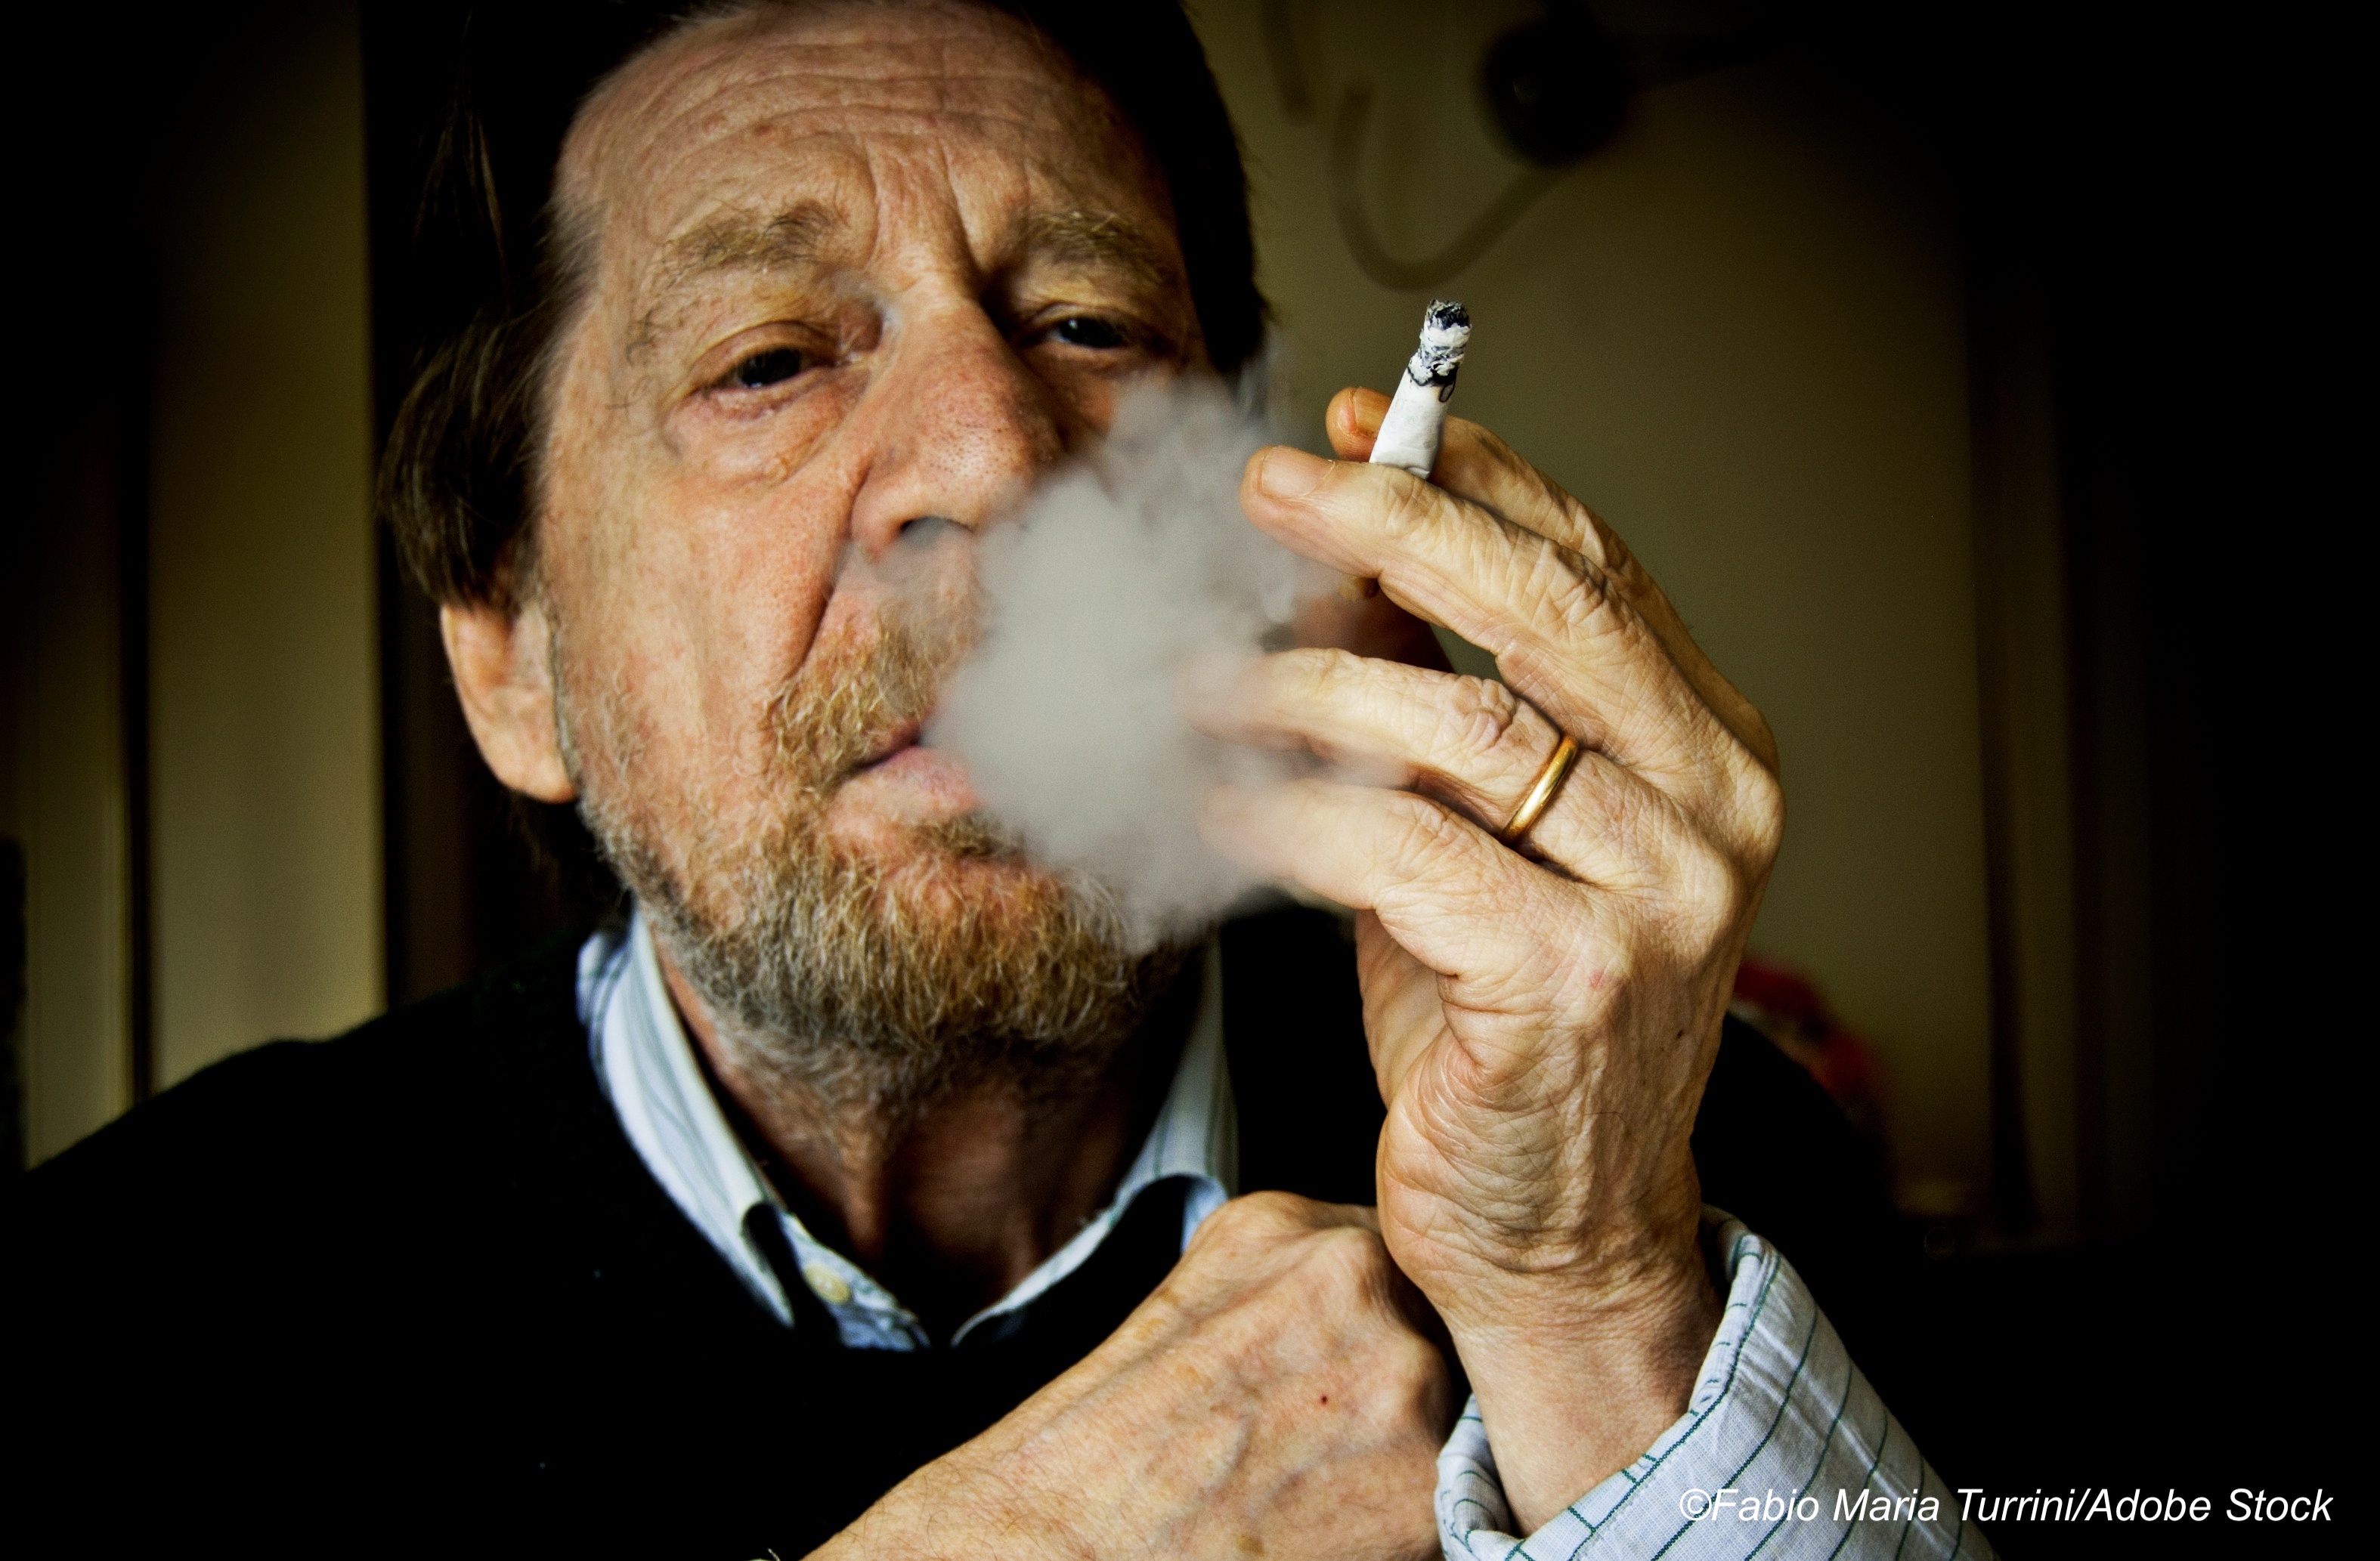 Genetic Risk May Predispose Certain Smokers to COPD